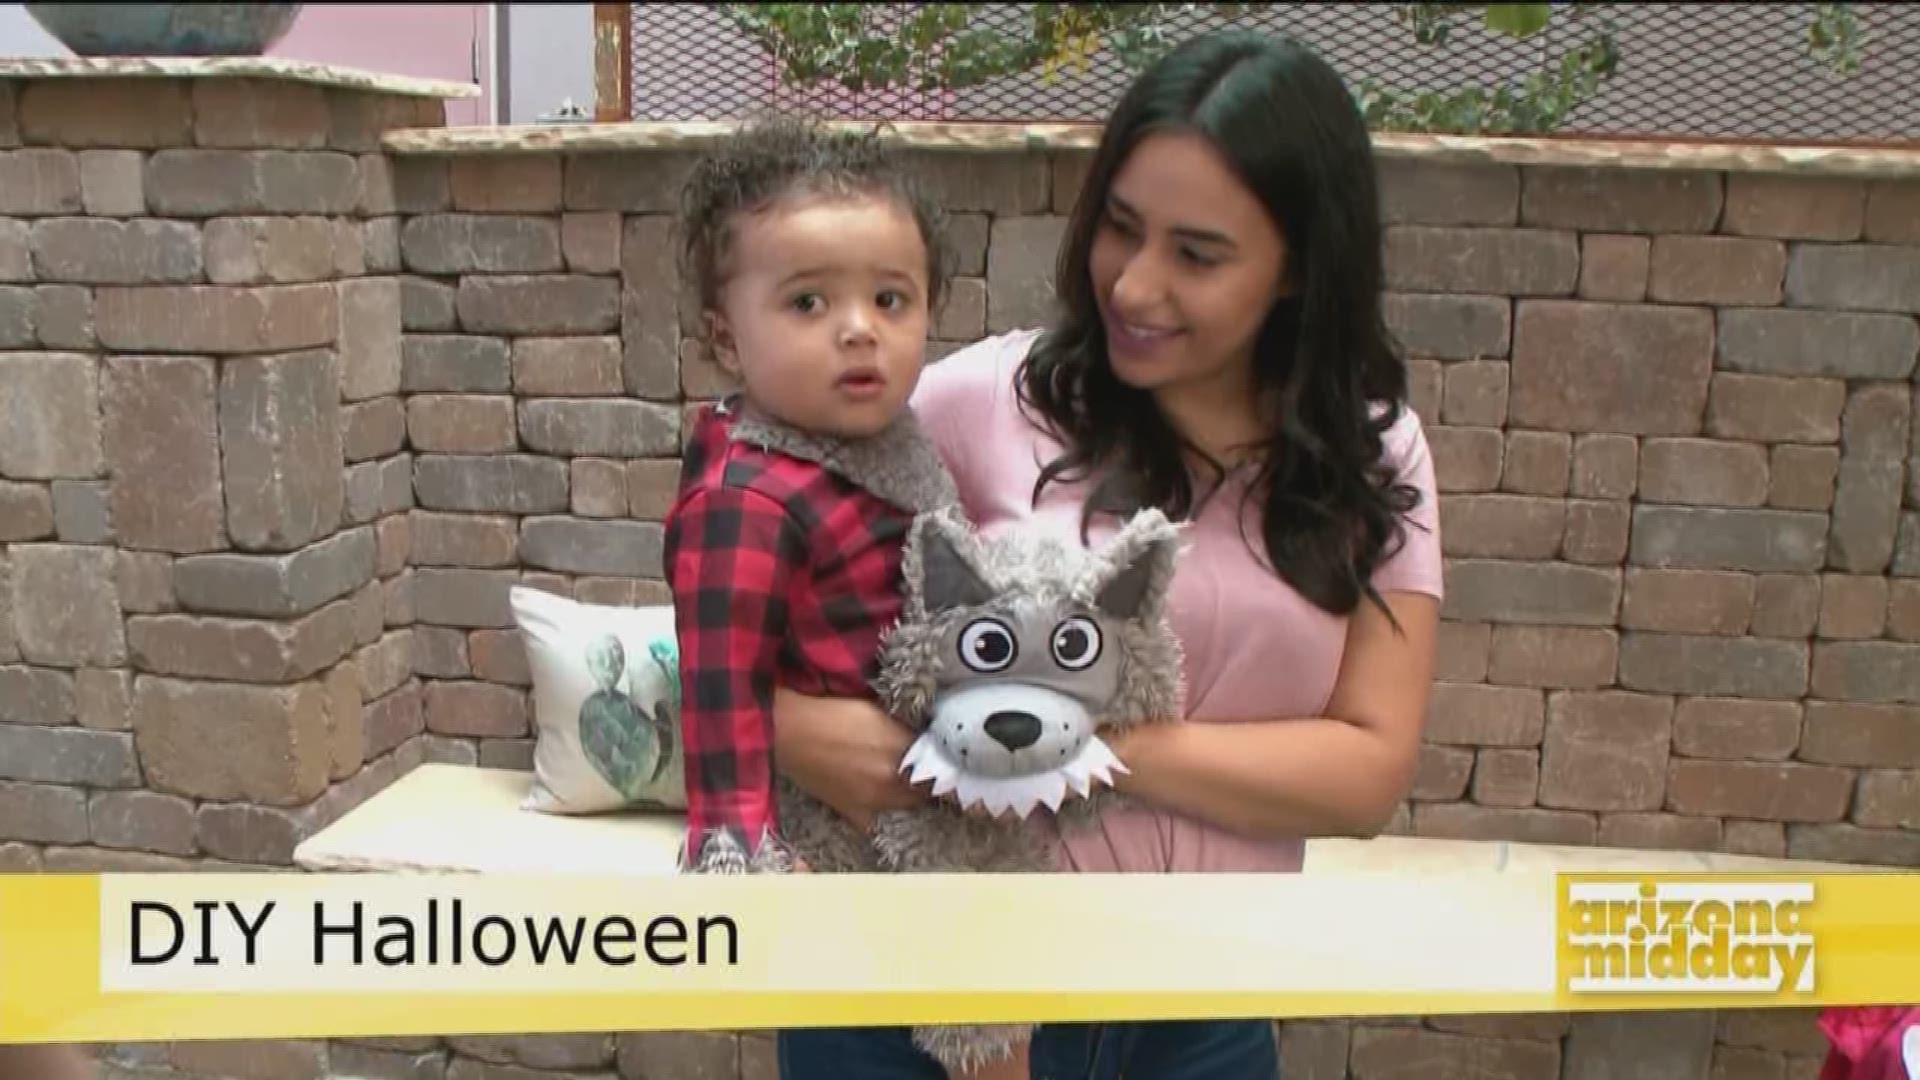 Brenda with Ahwatukee Kid to Kid, shows us how to put together DIY Halloween costumes